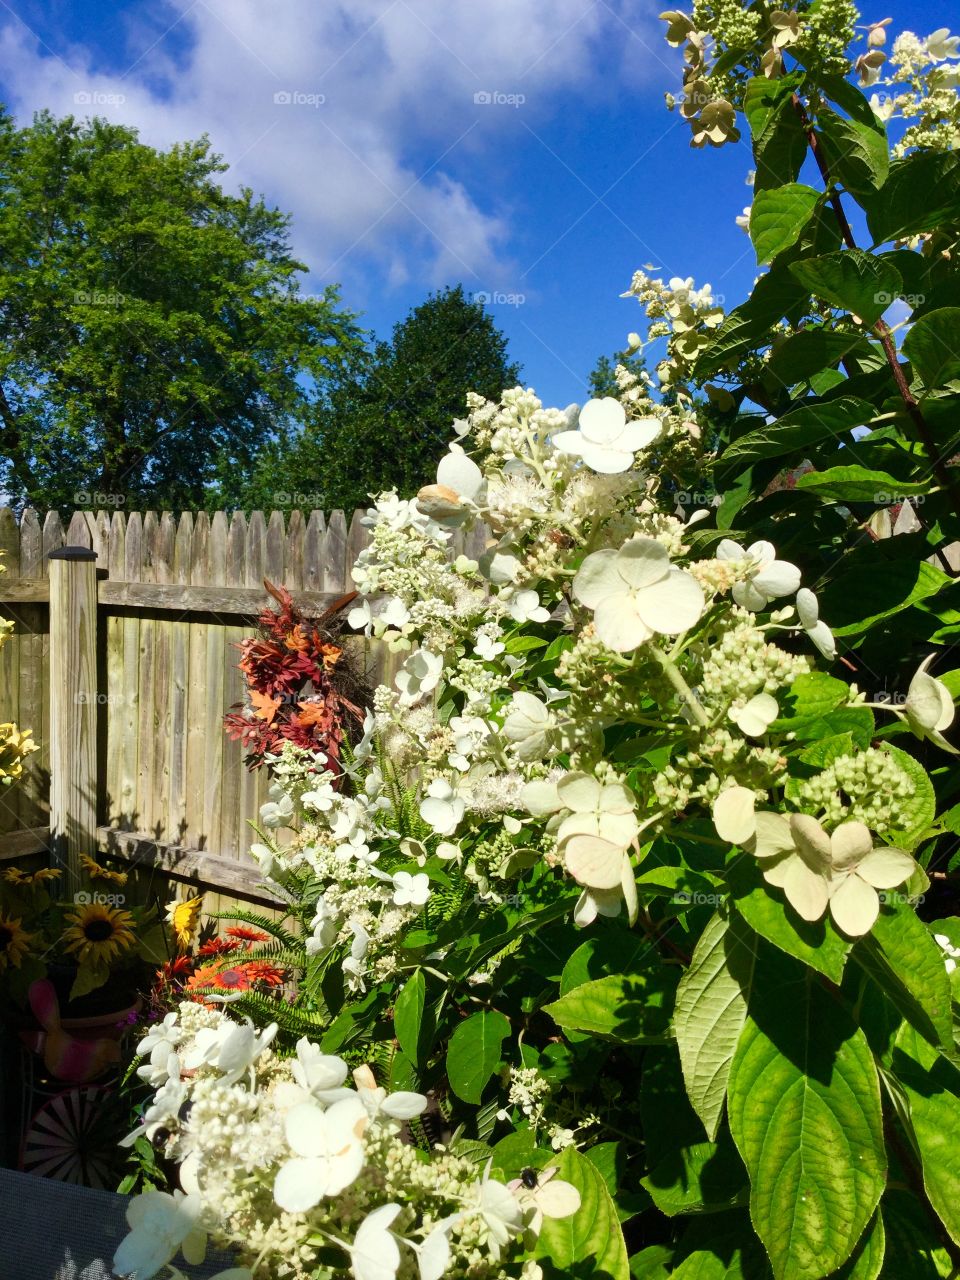 Lots of white flowers blooming in the garden 